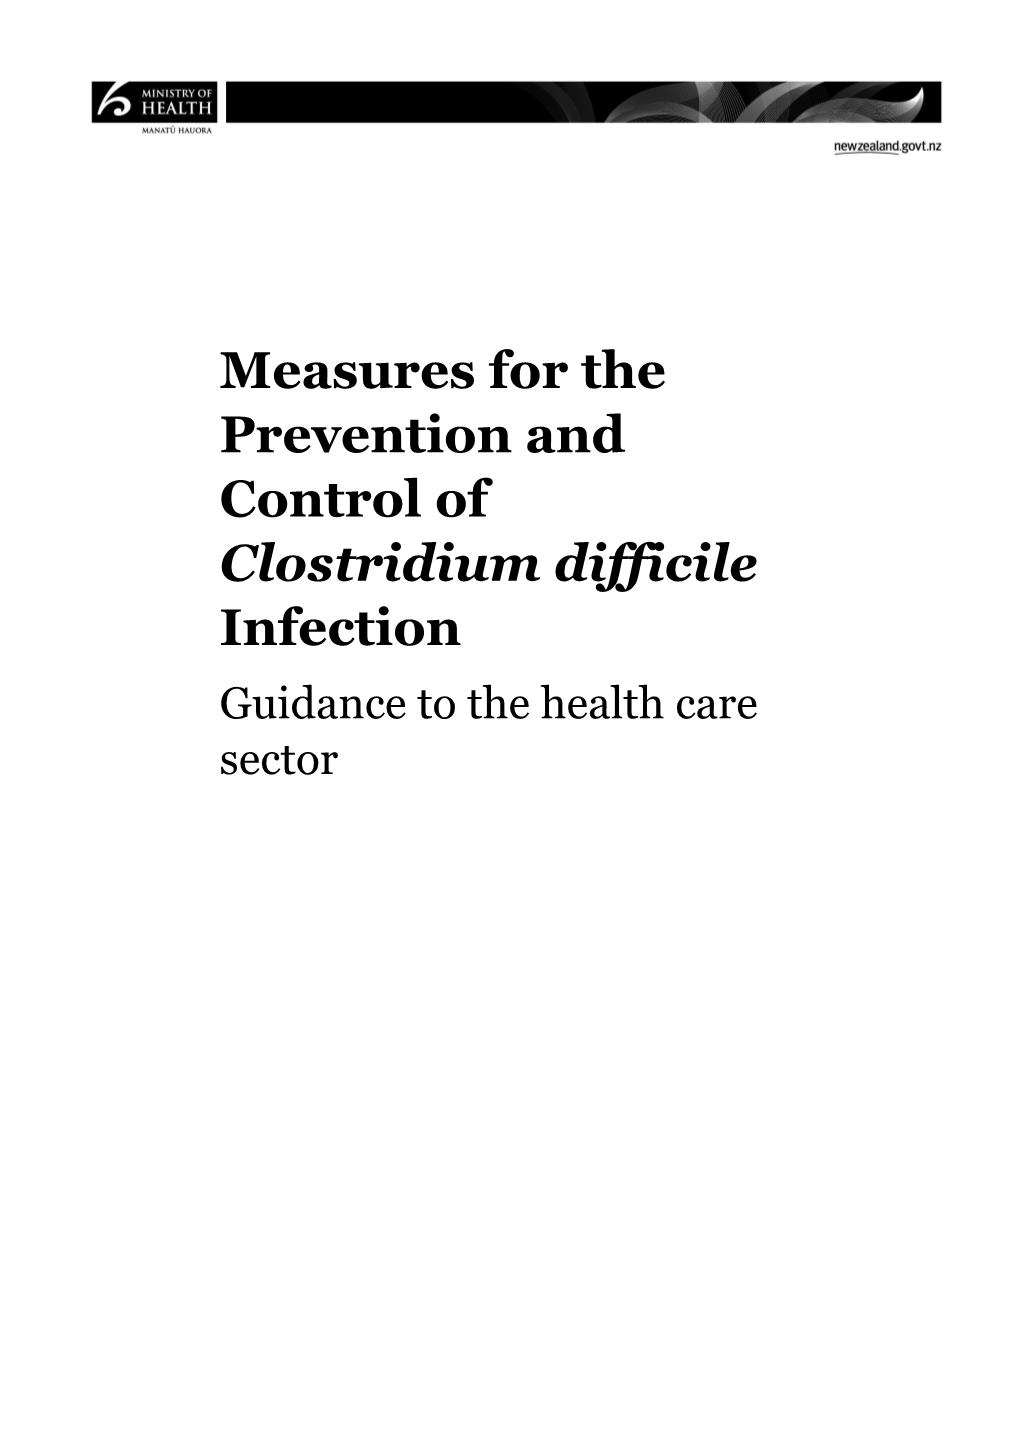 Measures for the Prevention and Control of Clostridium Difficile Infection